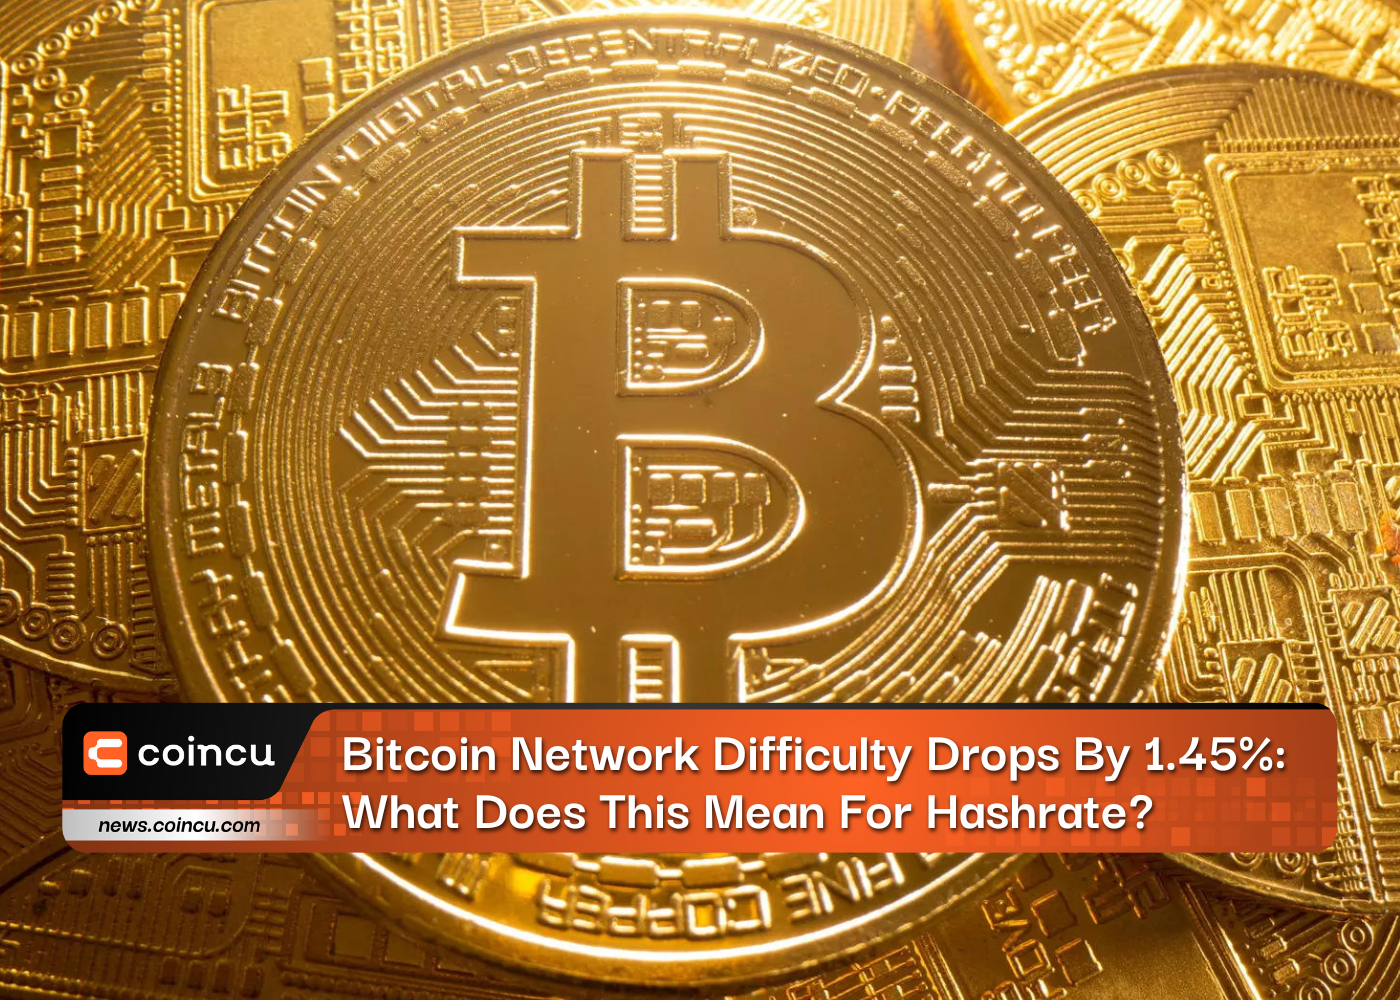 Bitcoin Network Difficulty Drops By 1.45%: What Does This Mean For Hashrate?